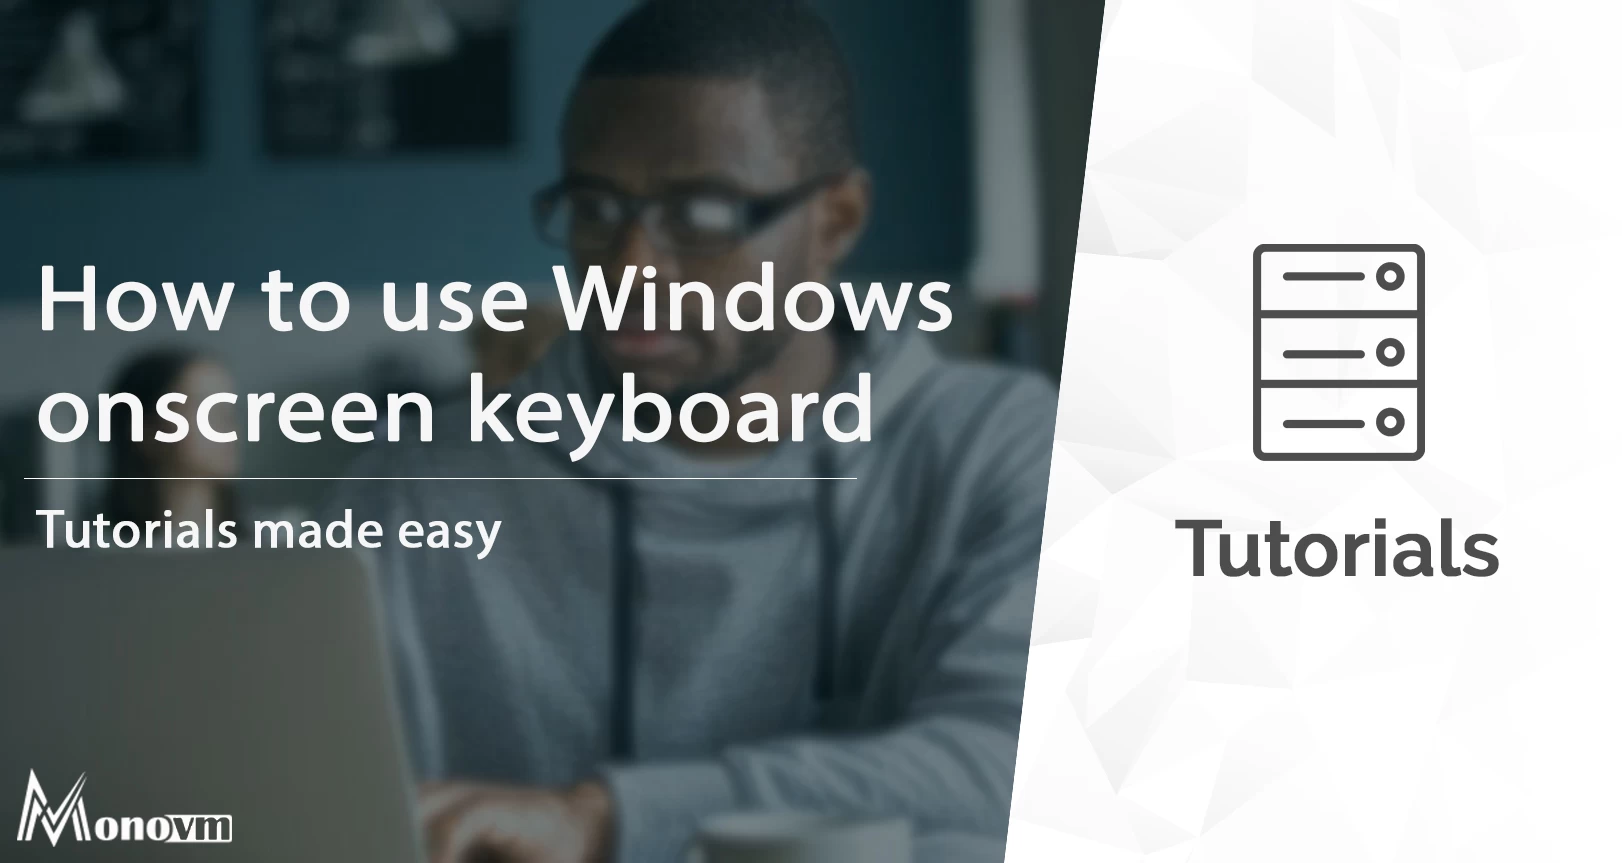 Windows Onscreen Keyboard: Tips, Tricks, and Troubleshooting